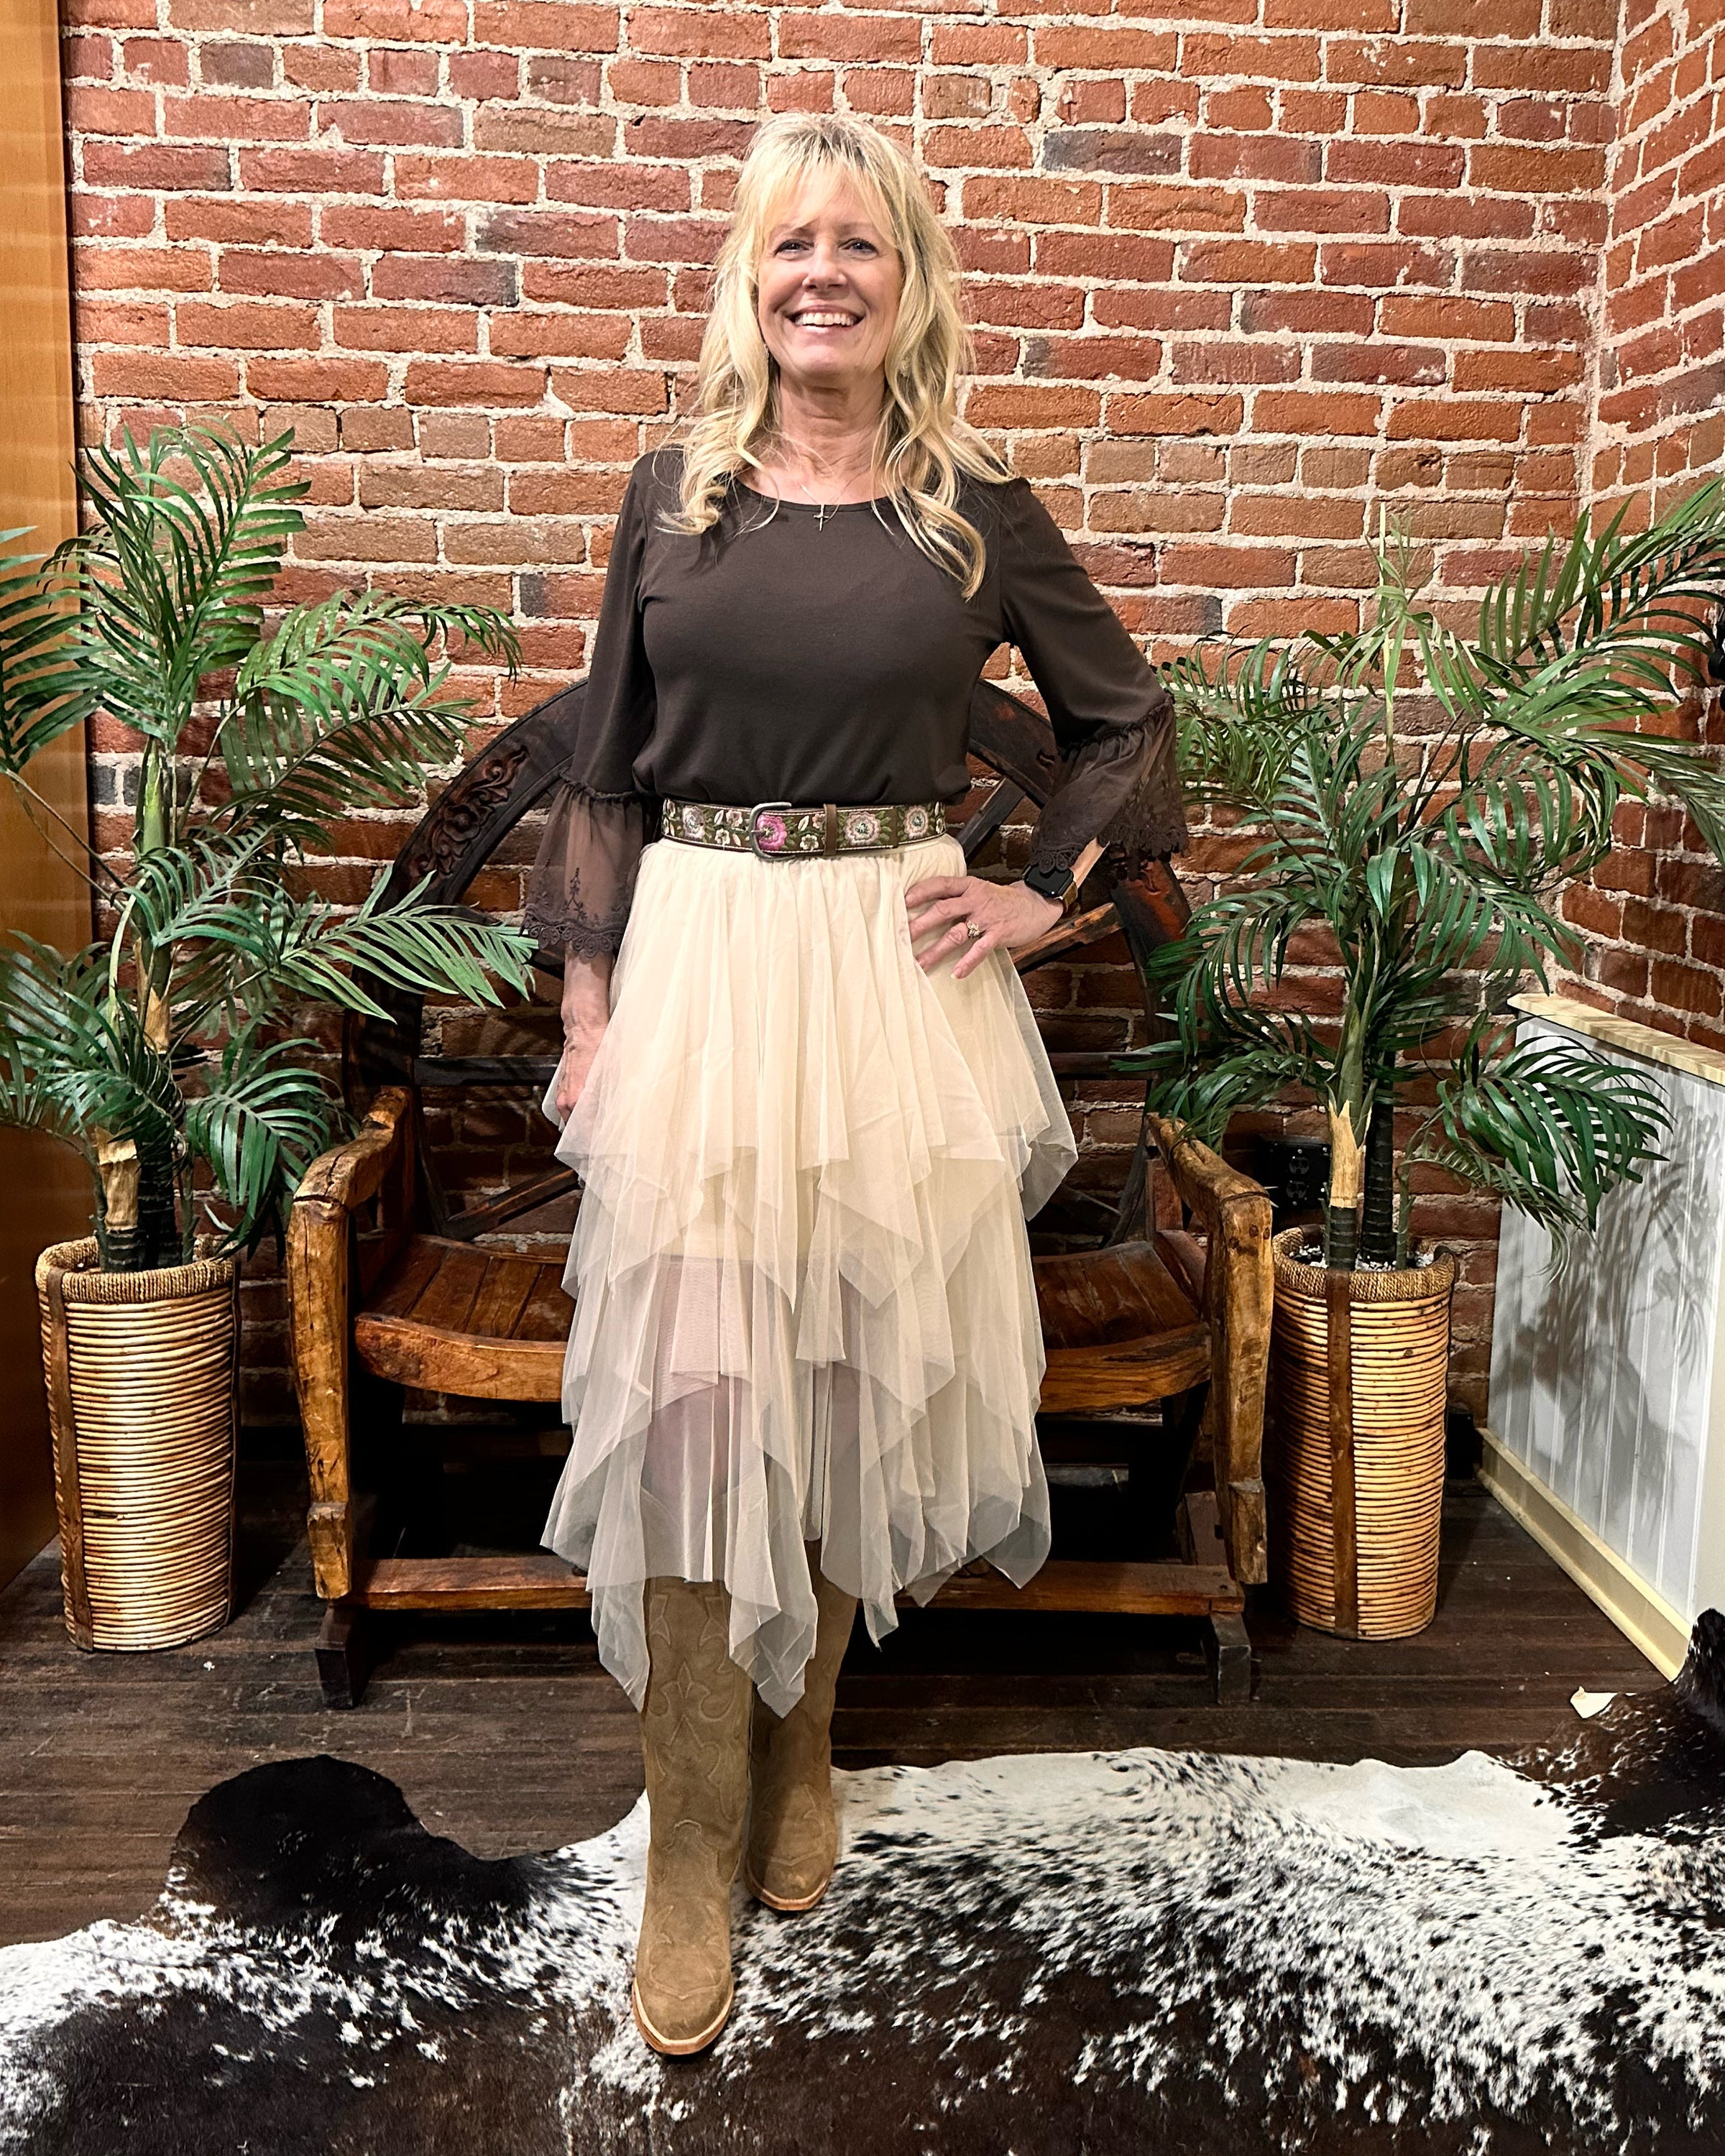 Layered Lace Inspired Mesh Skirt by Origami Apparel-Skirt-Origami-Gallop 'n Glitz- Women's Western Wear Boutique, Located in Grants Pass, Oregon